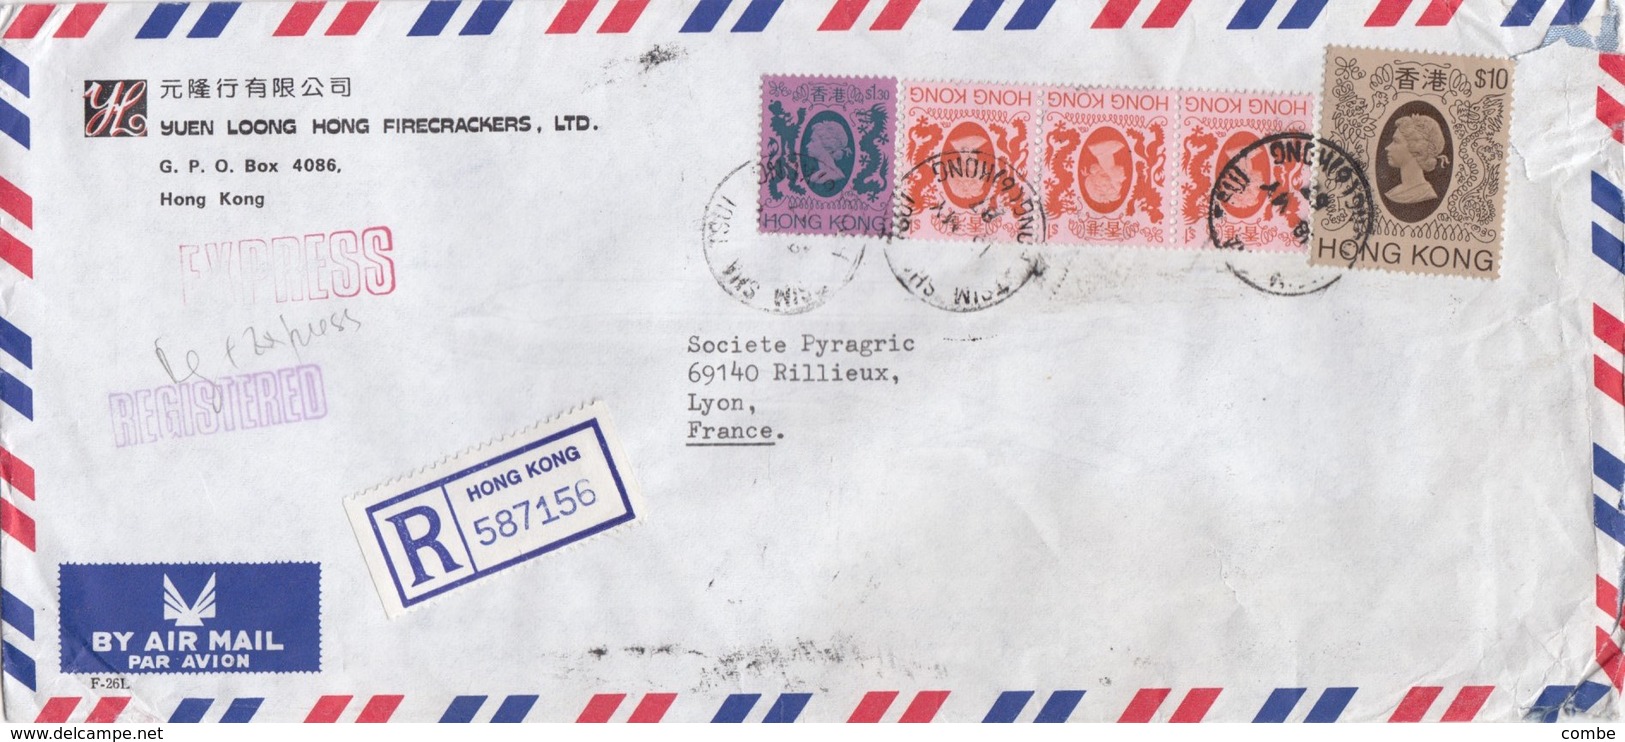 COVER CHINA. HONG KONG EXPRESS REGISTERED COVER TO FRANCE. 14$ 30c.  YUEN LOONG  / 2 - Lettres & Documents